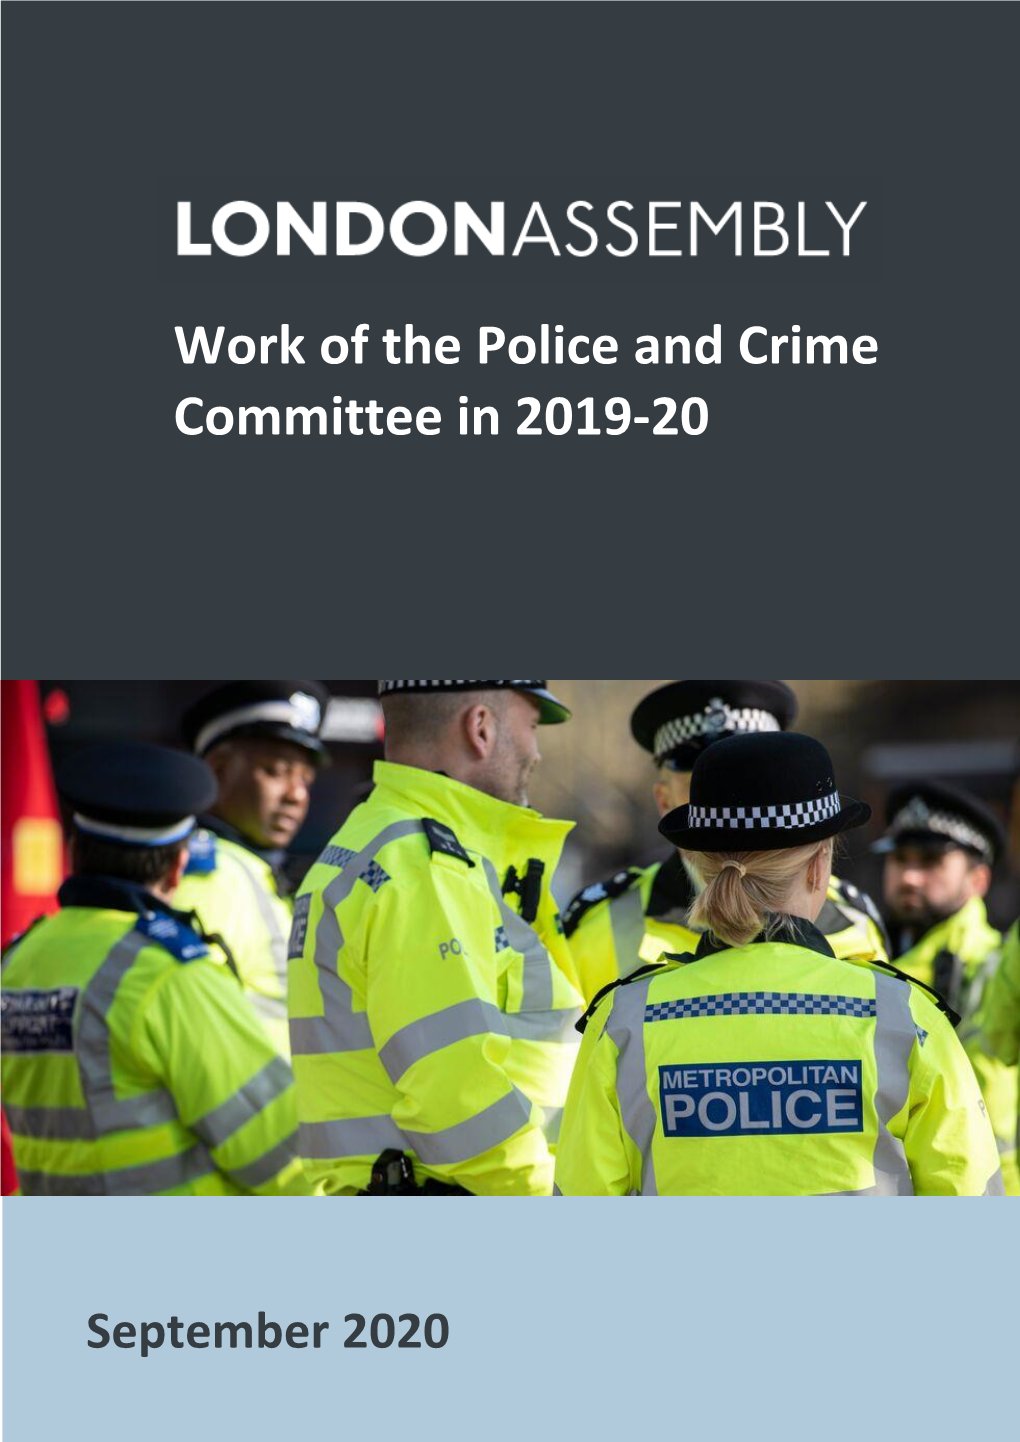 Work of the Police and Crime Committee in 2019-20